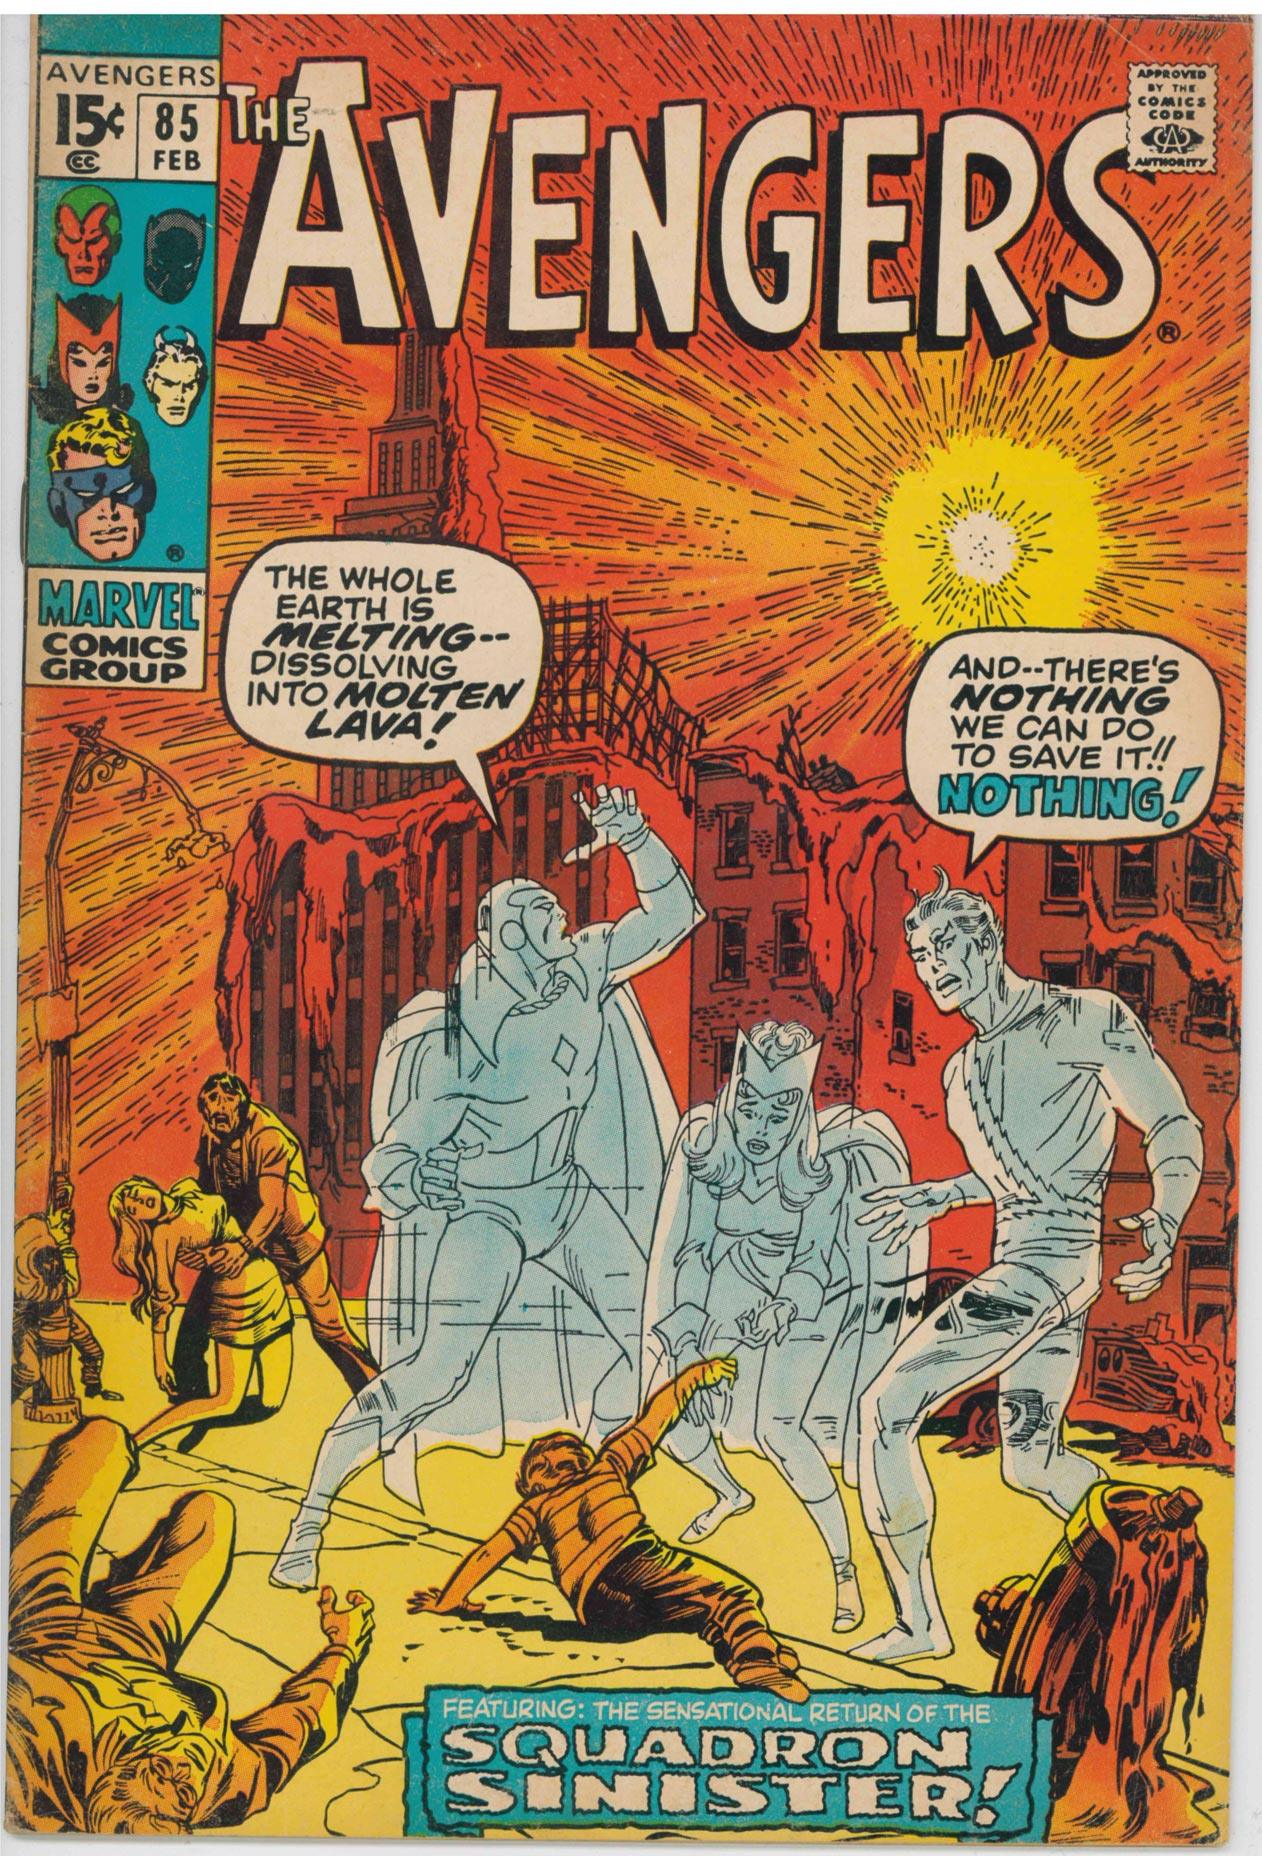 AVENGERS (1963) #85 (FN/VF) - FIRST APPEARANCE SQUADRON SUPREME - Kings Comics